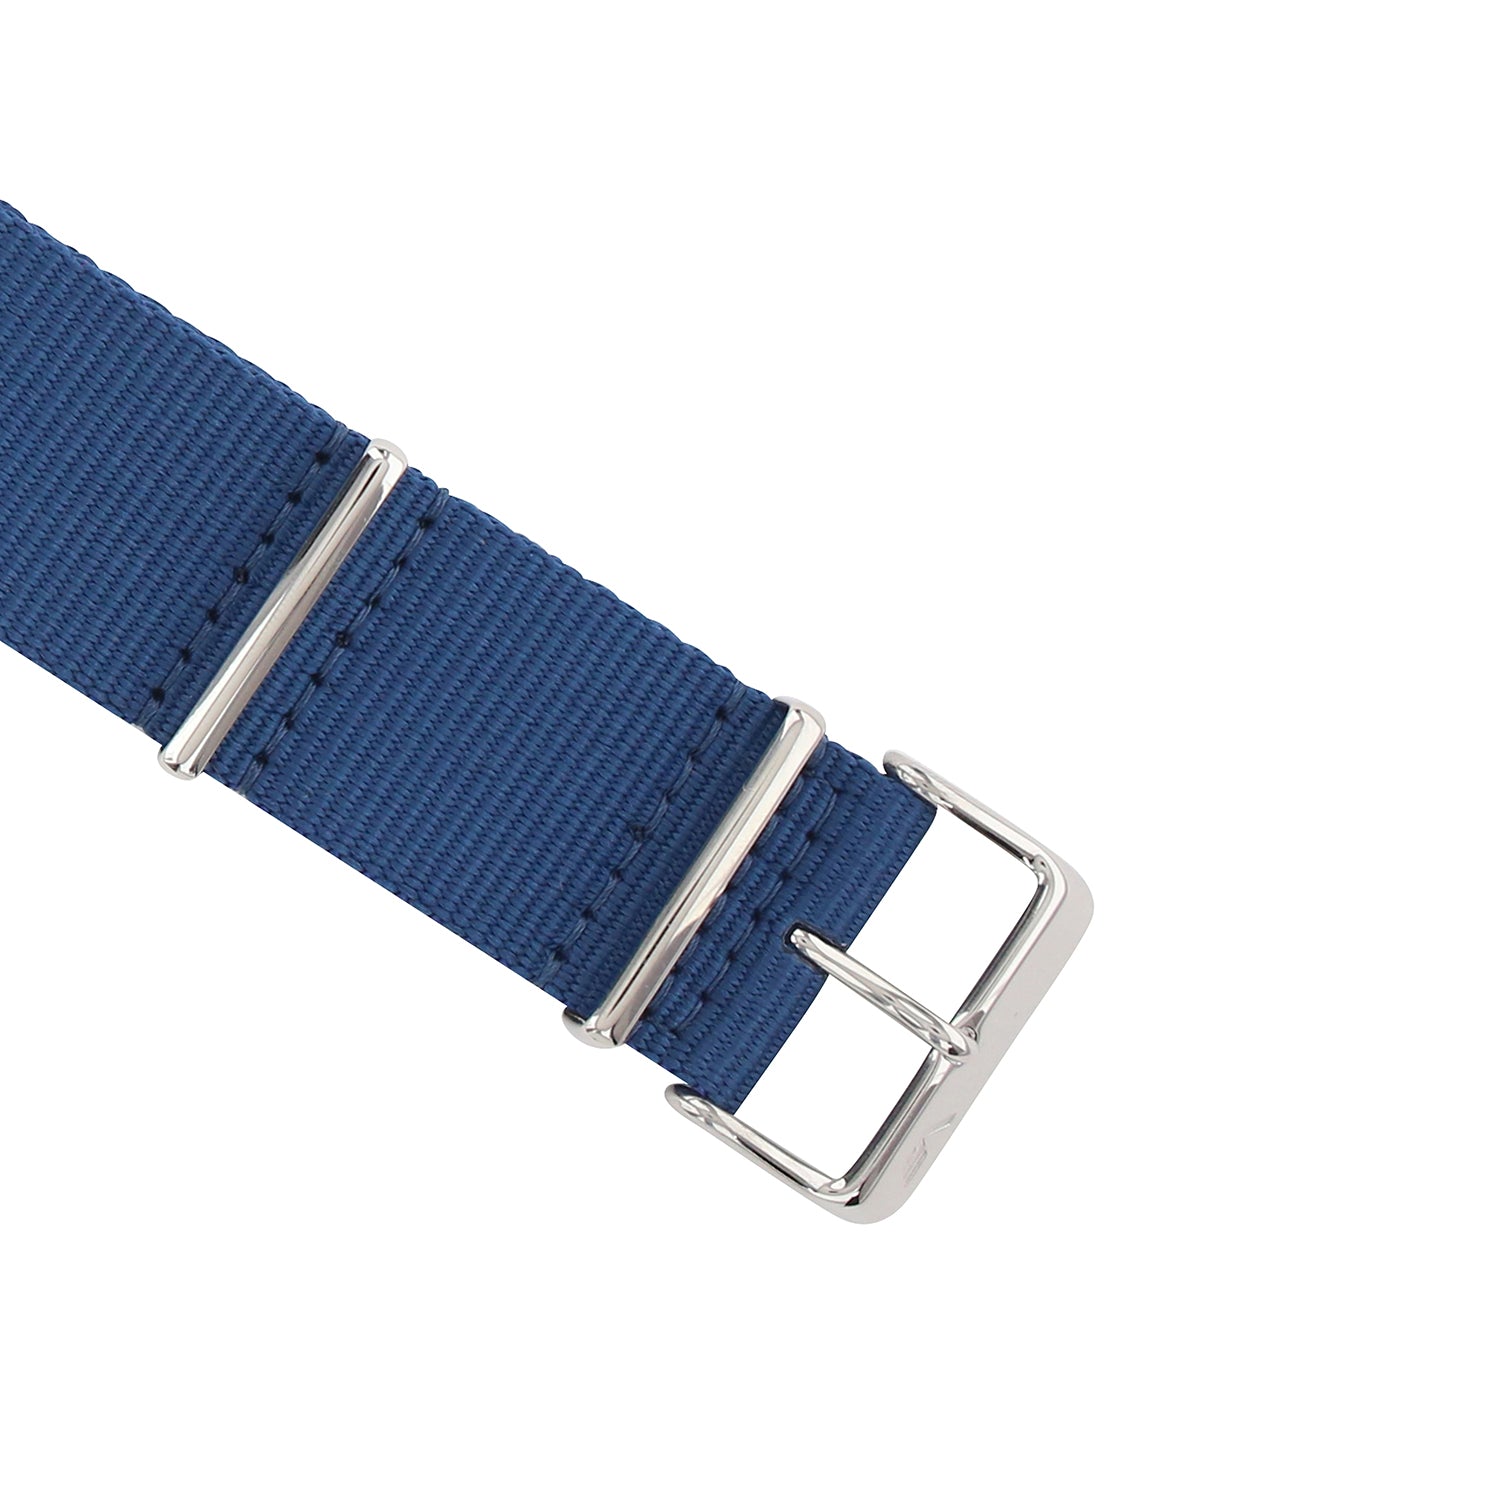 EXPEDITION NP1 / EVEREST BLUE NYLON STRAP 24mm - POLISHED BUCKLE